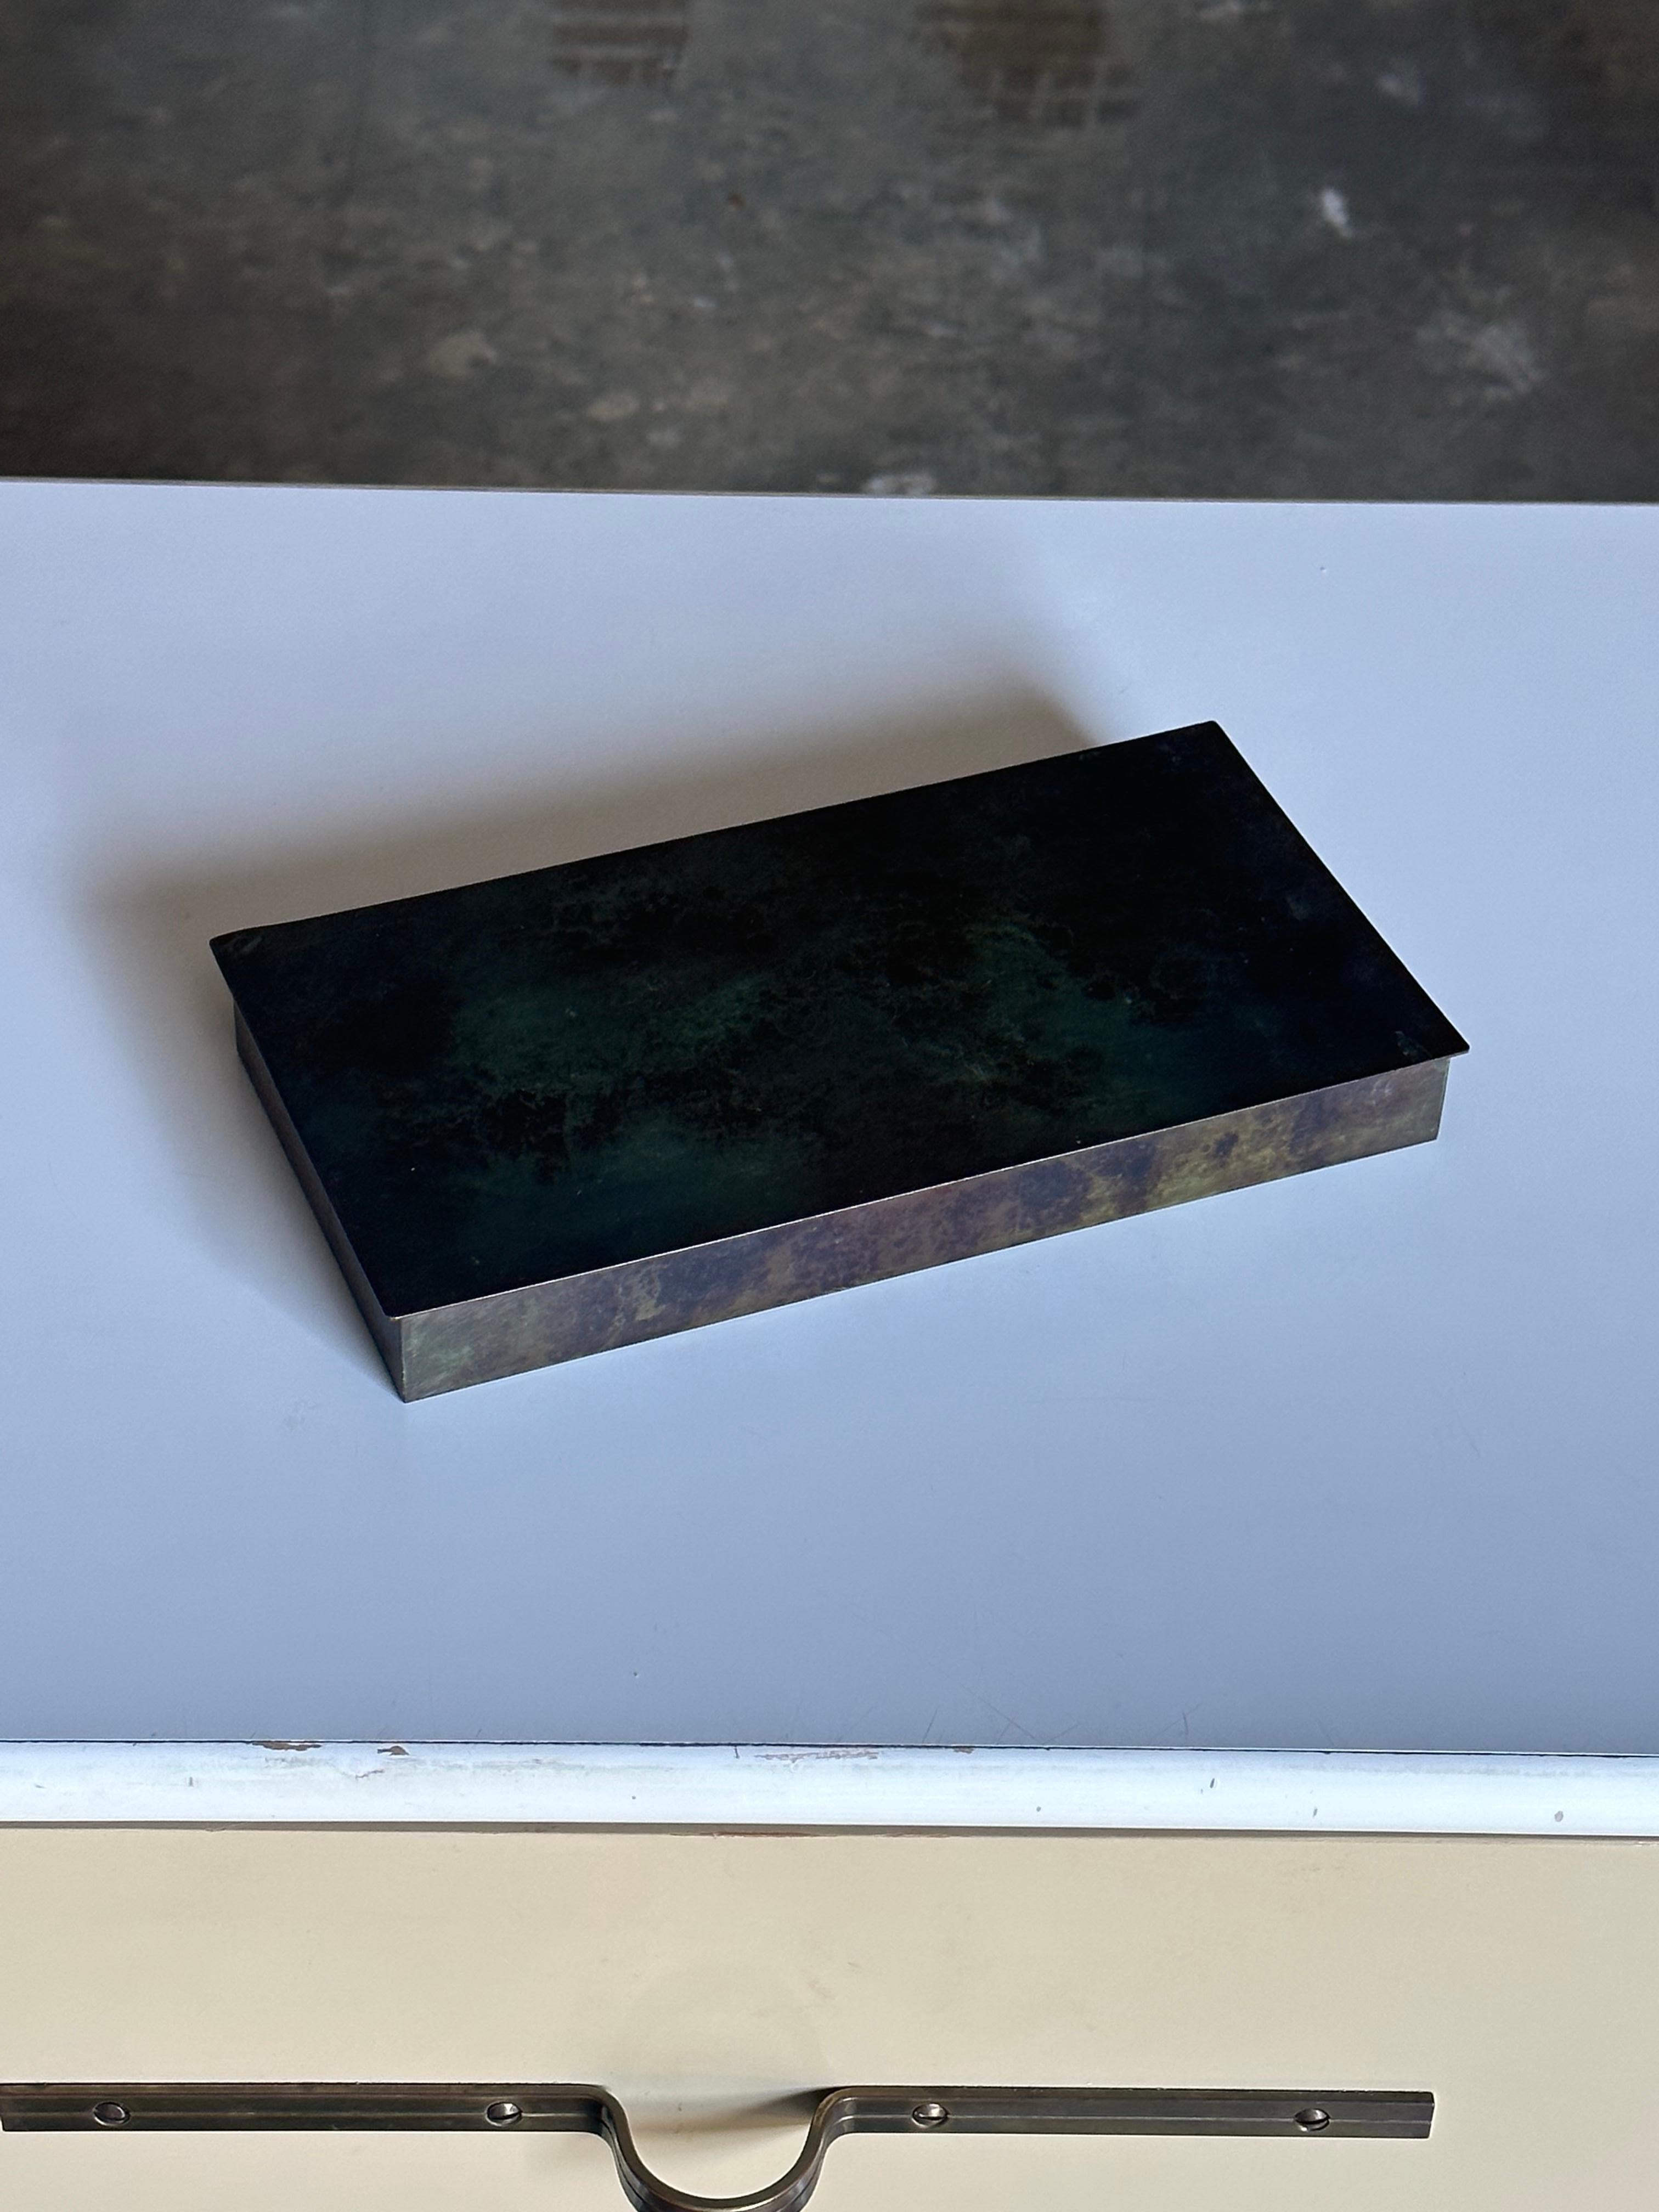 A bronze hinged lid box by GAB, Guldsmedsaktiebolaget. Wonderful patina with the bronze showing a greenish effect throughout. Great Art Deco styling. Could be used as a jewelry or pencil box.